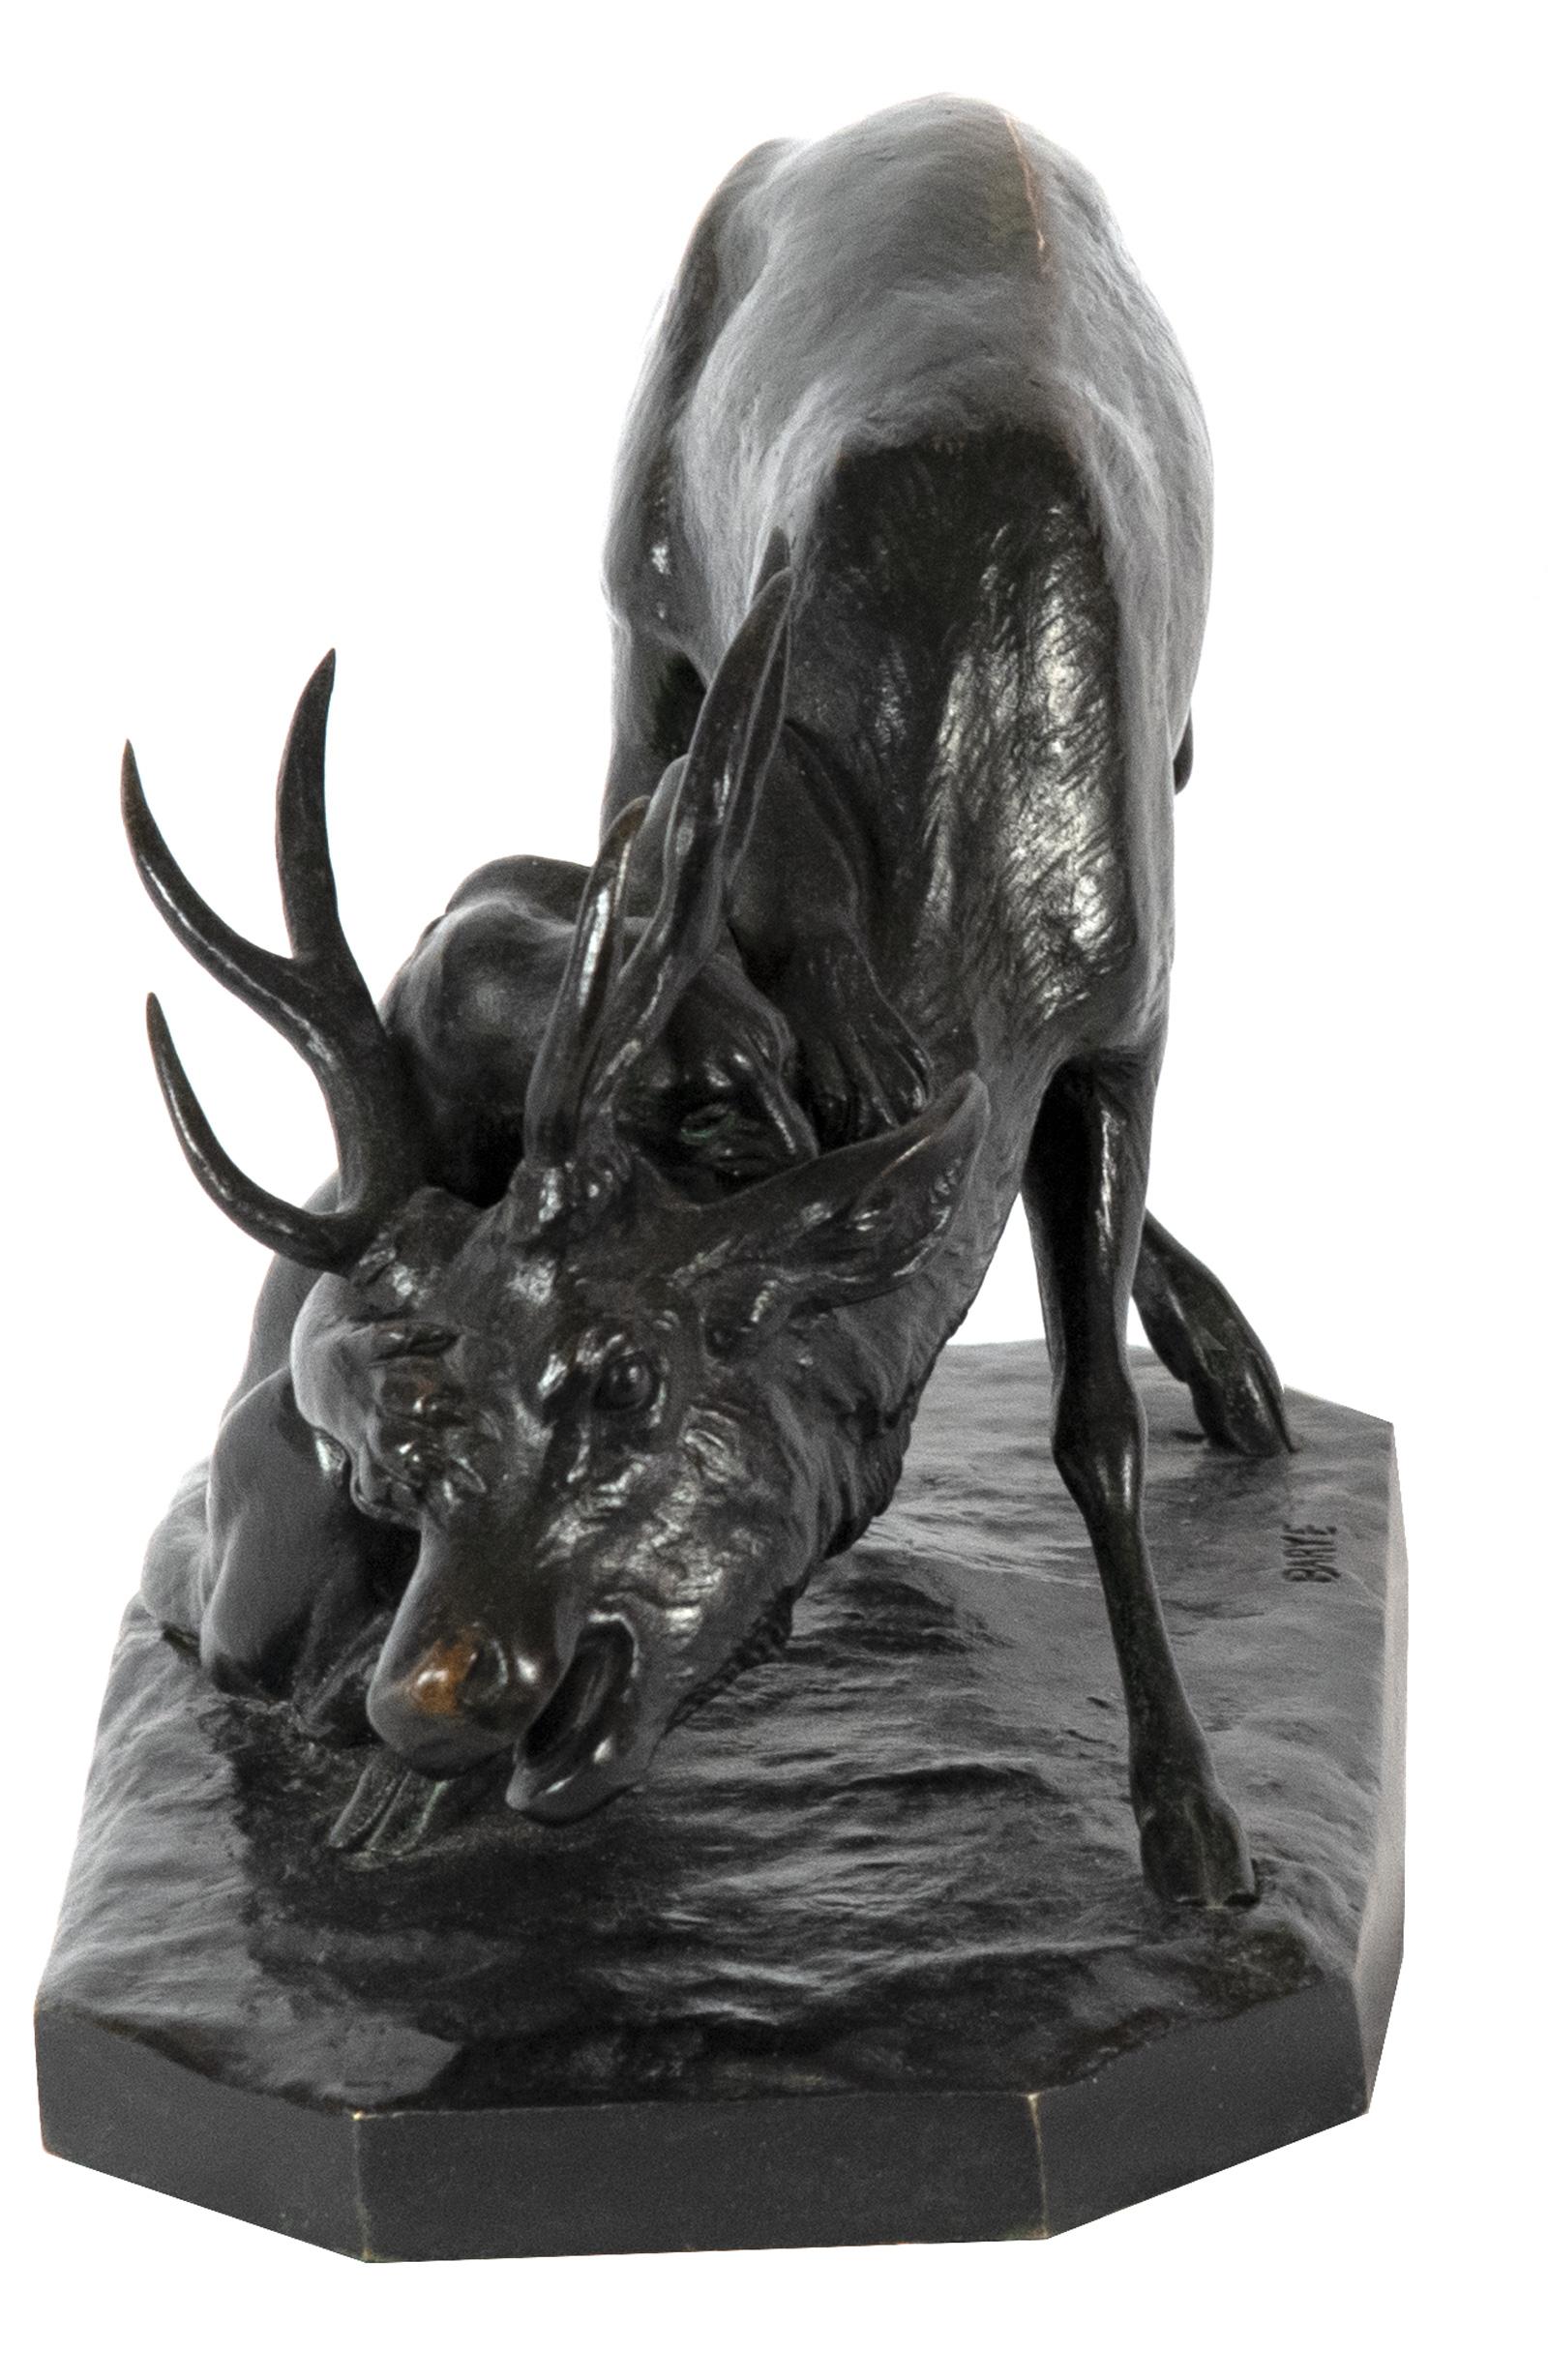 Considered one the most famous sculptors of the nineteenth century Antoine-Louis Barye specialized in depicting animals from monuments to smaller works, like this, destined for fine homes. 

Barye began his career as a goldsmith, studied at the